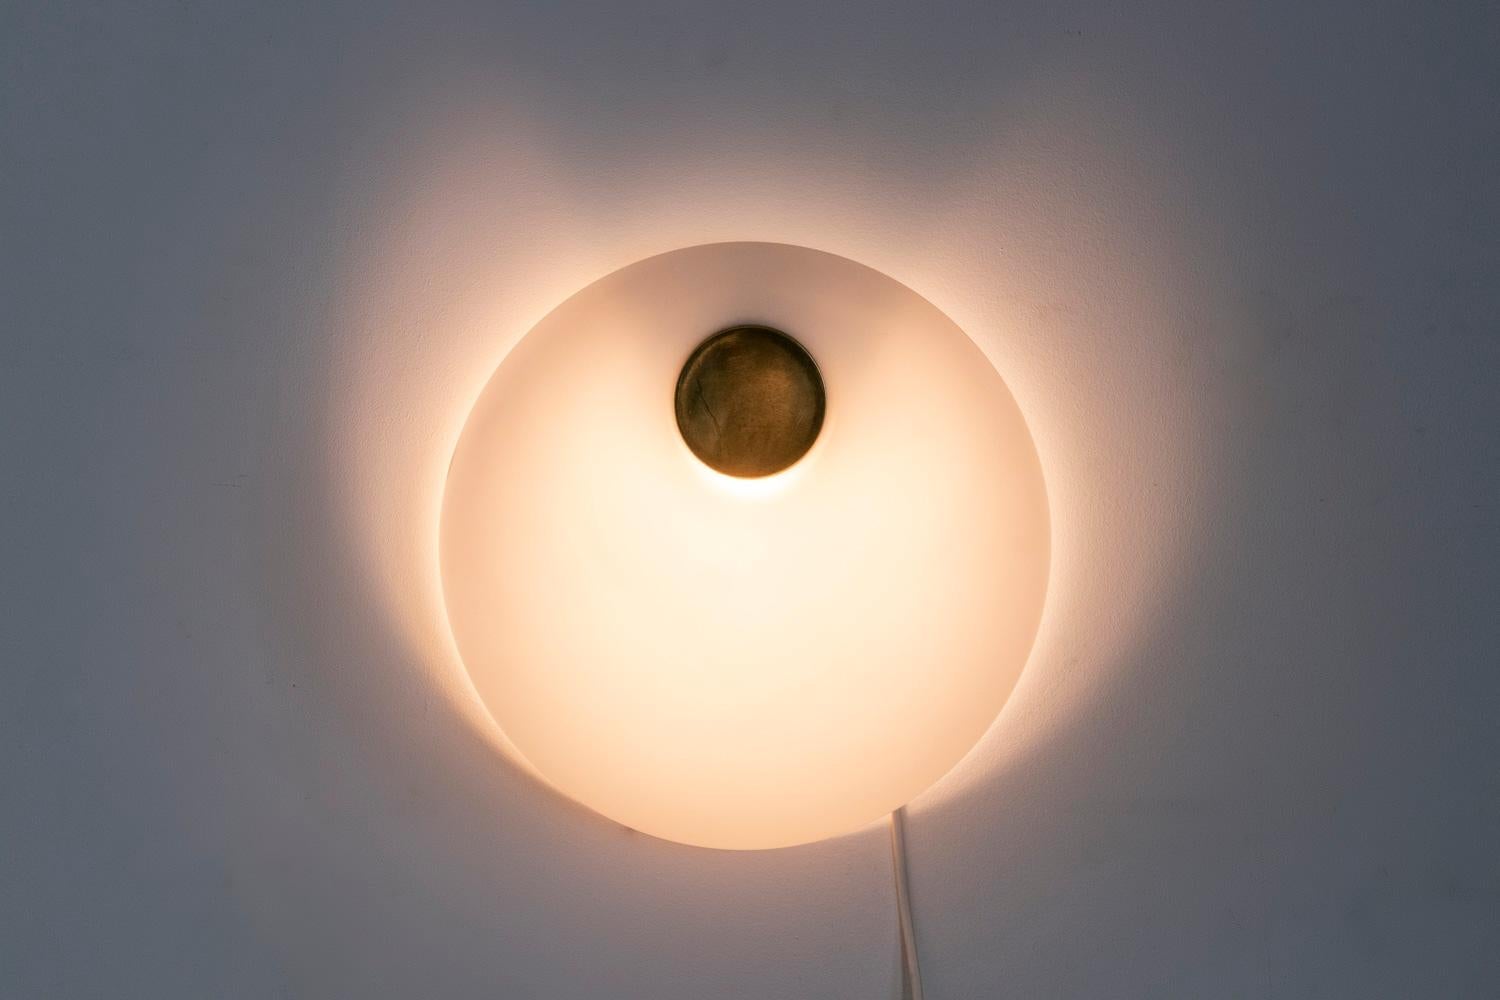 Wall lamp in Murano glass, in white opaline. Brass circular shape in the center.

Italian work made in the 1970s.